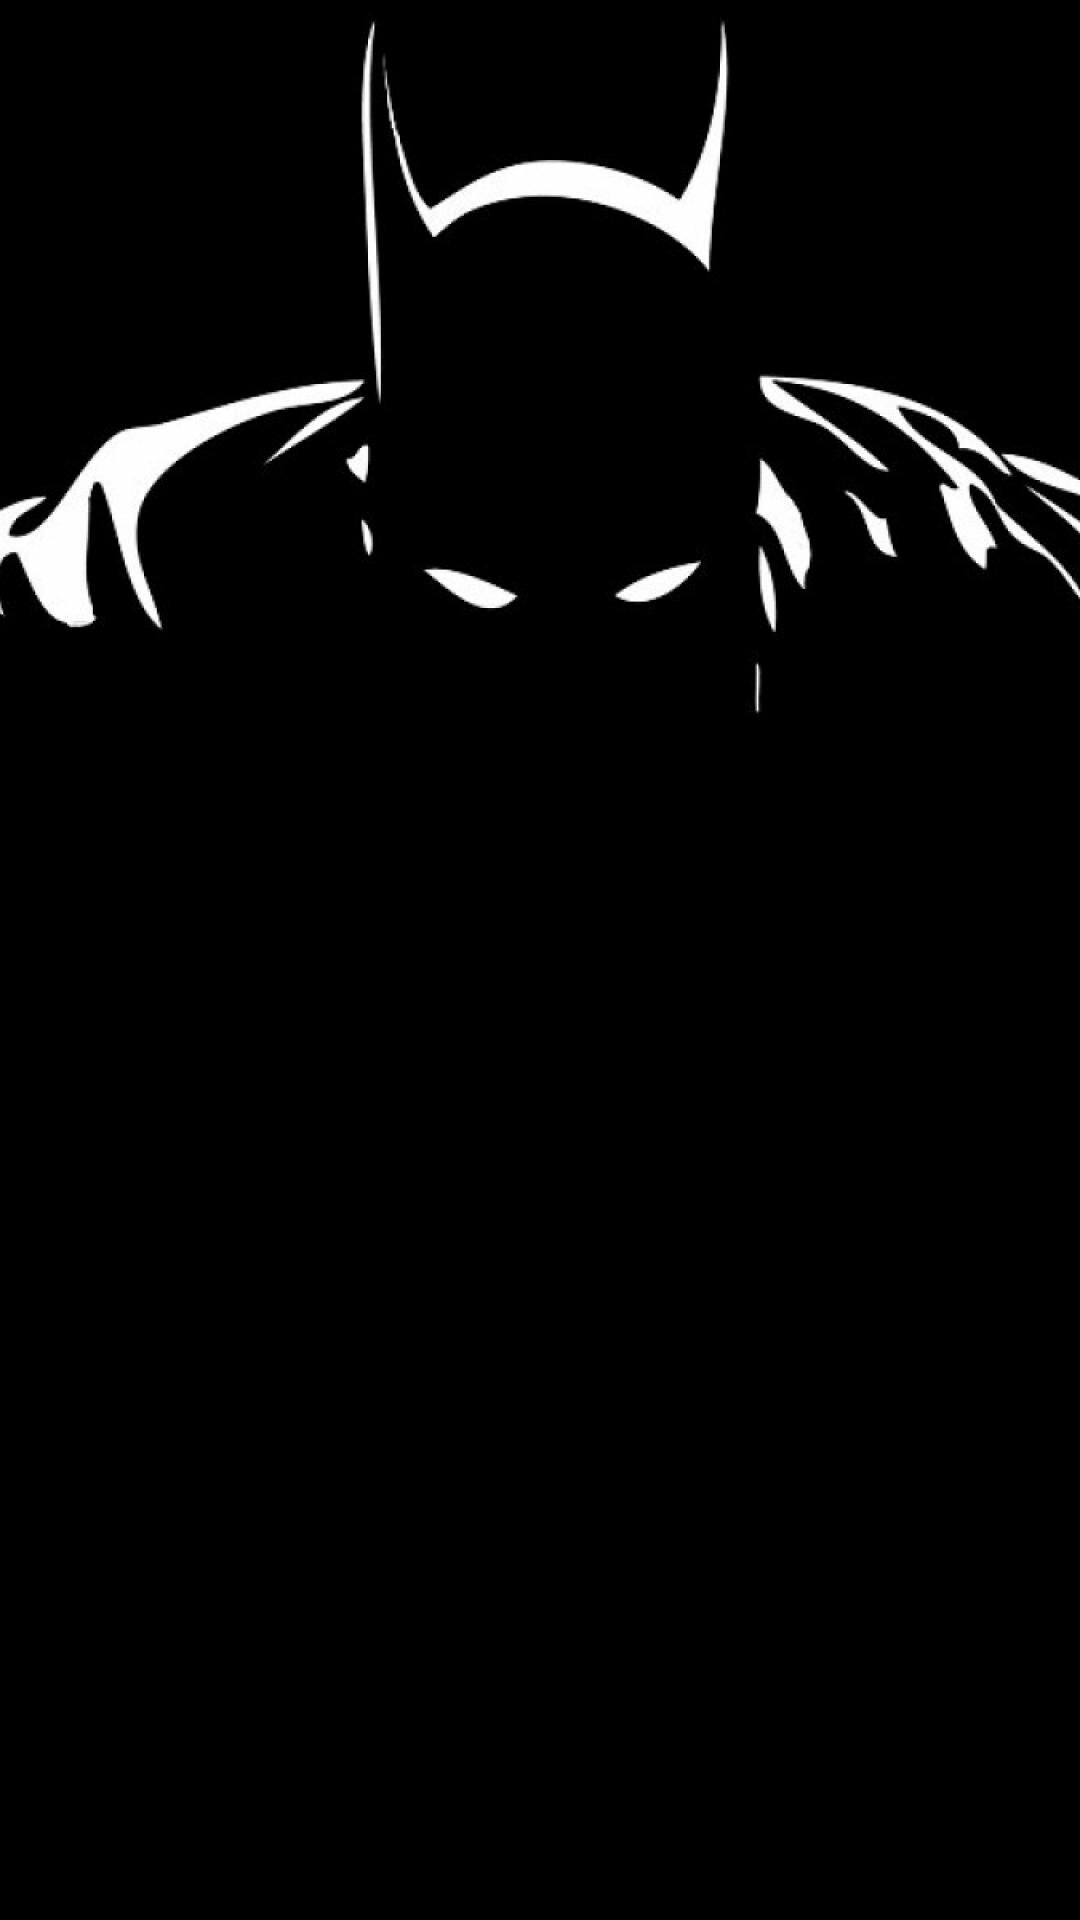 Batman Wallpaper: HD, 4K, 5K for PC and Mobile. Download free image for iPhone, Android